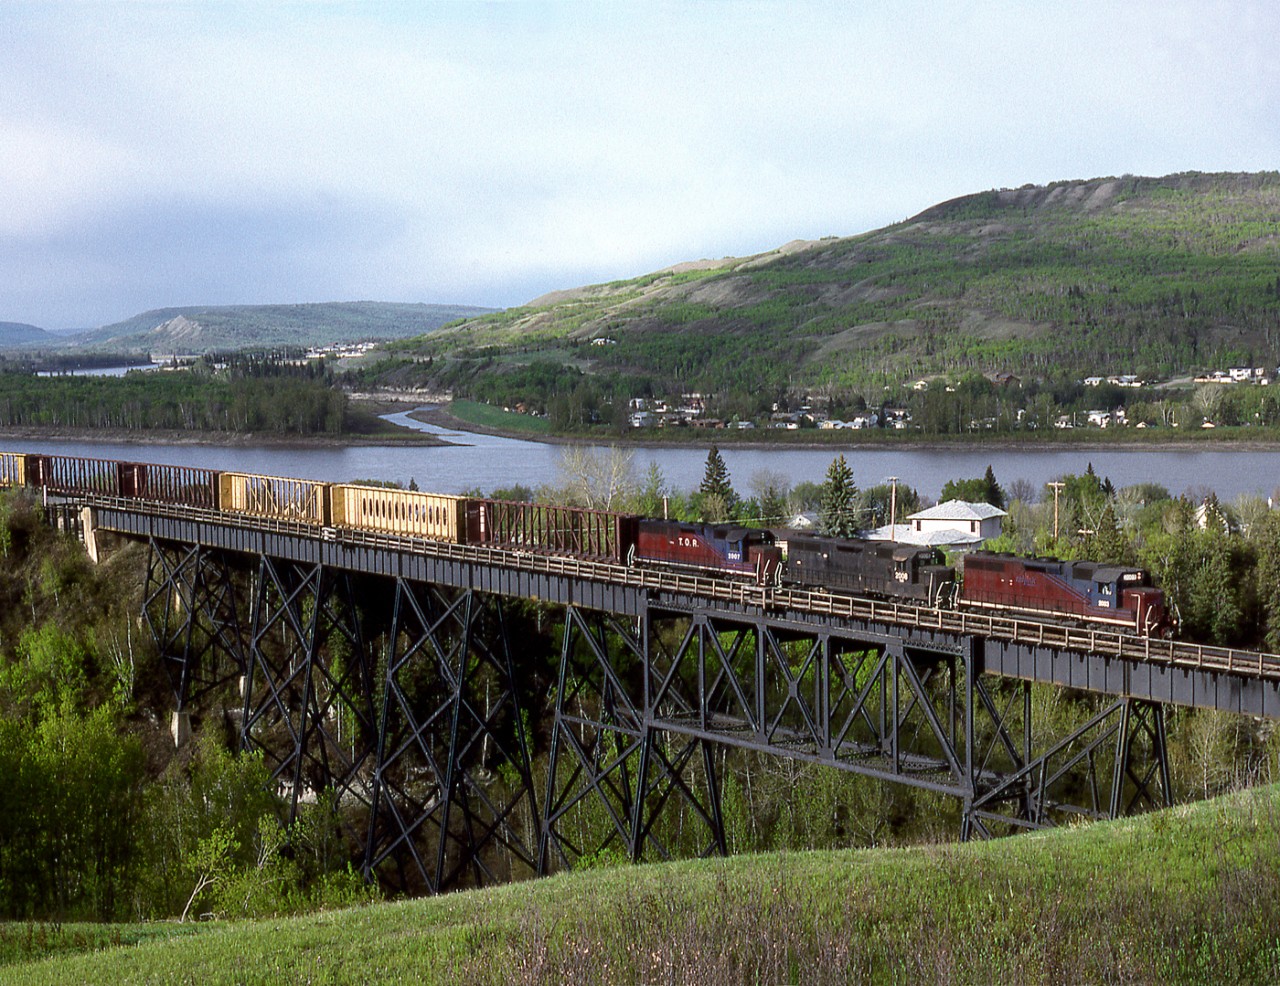 Railinks Mackenzie Northern Railroad train 561 from Edmonton to Hay River NWT crosses Heart Creek as it descends into the Peace River Valley south of the town of Peace River